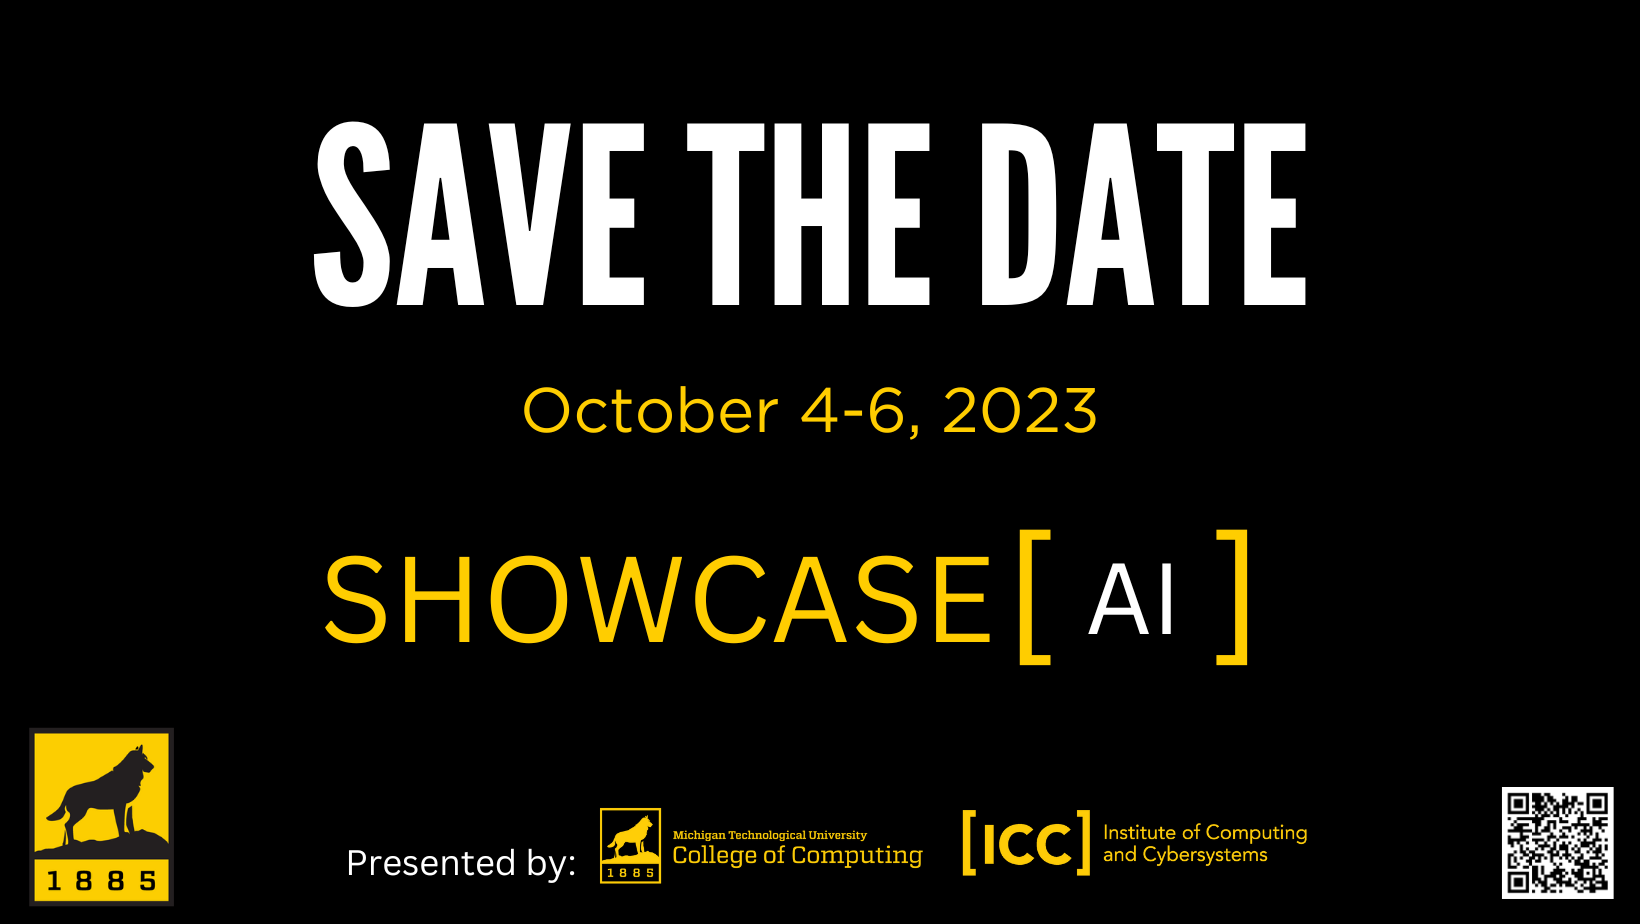 Save the Date October 4-6, 2023 Showcase [AI]. Presented by the College of Computing and the Institute of Computing and Cybersystems.